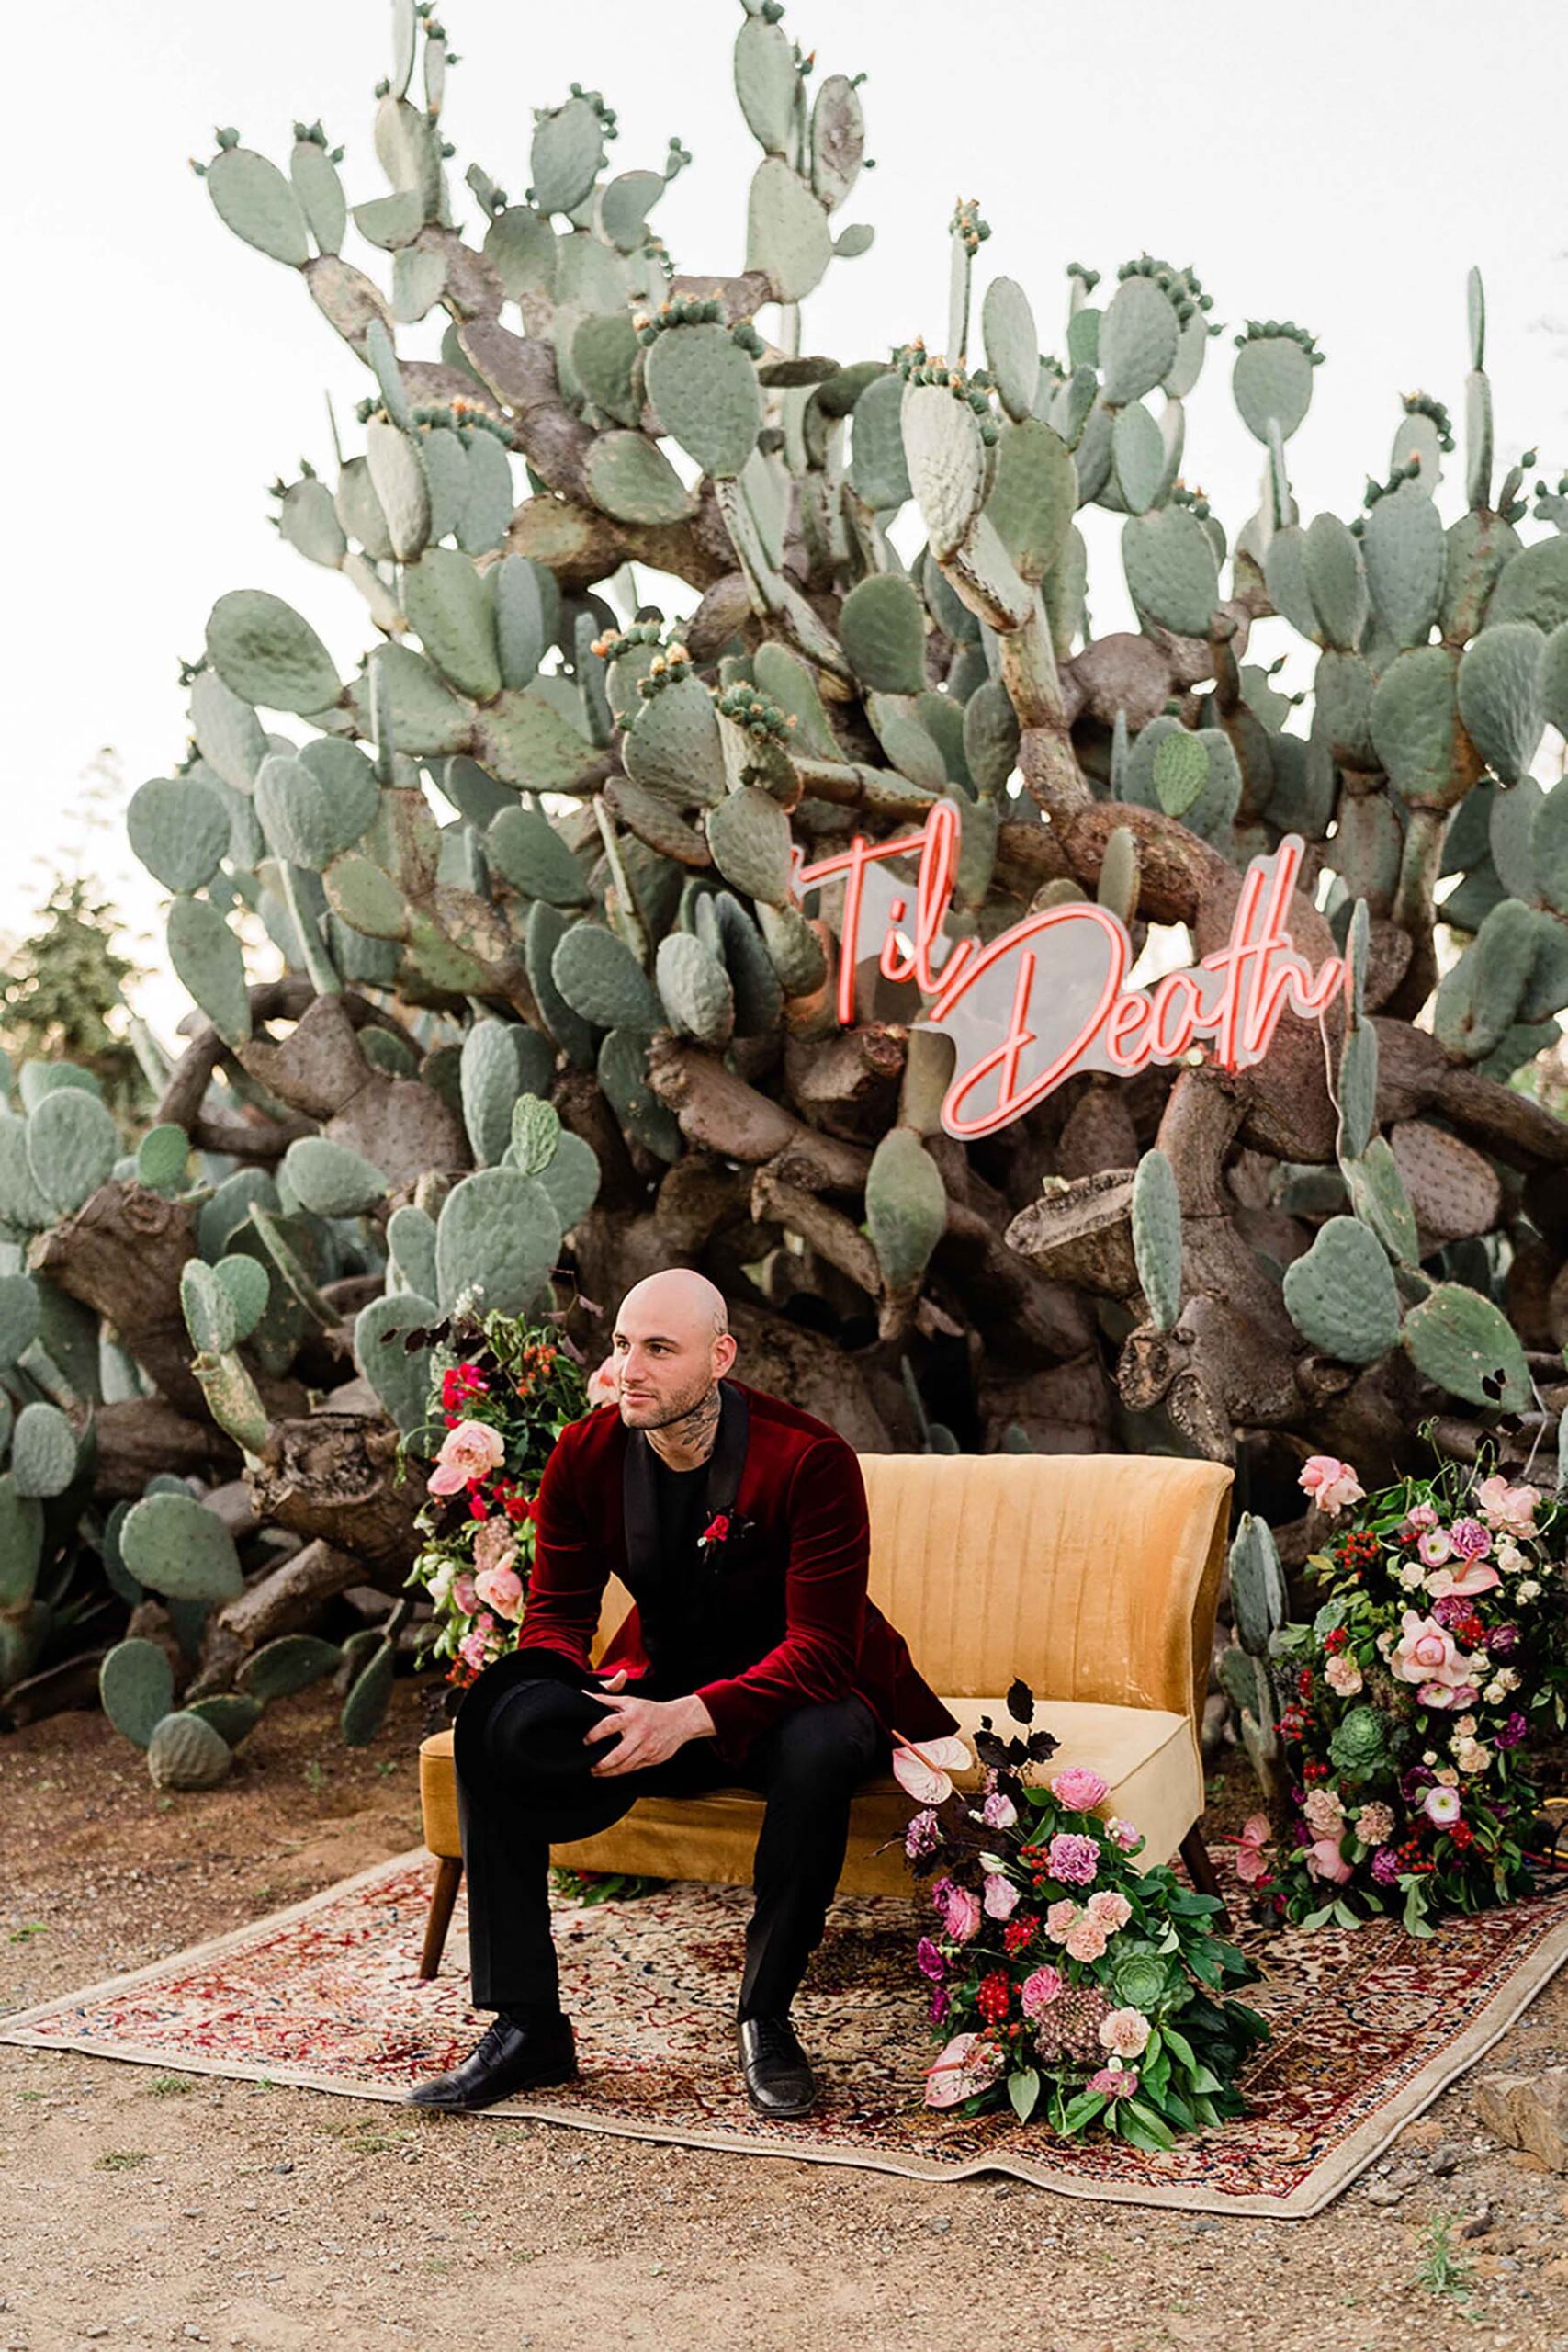 Spanish Lovers Styled Shoot by Quint Photography & Heirlooms by Gulshah